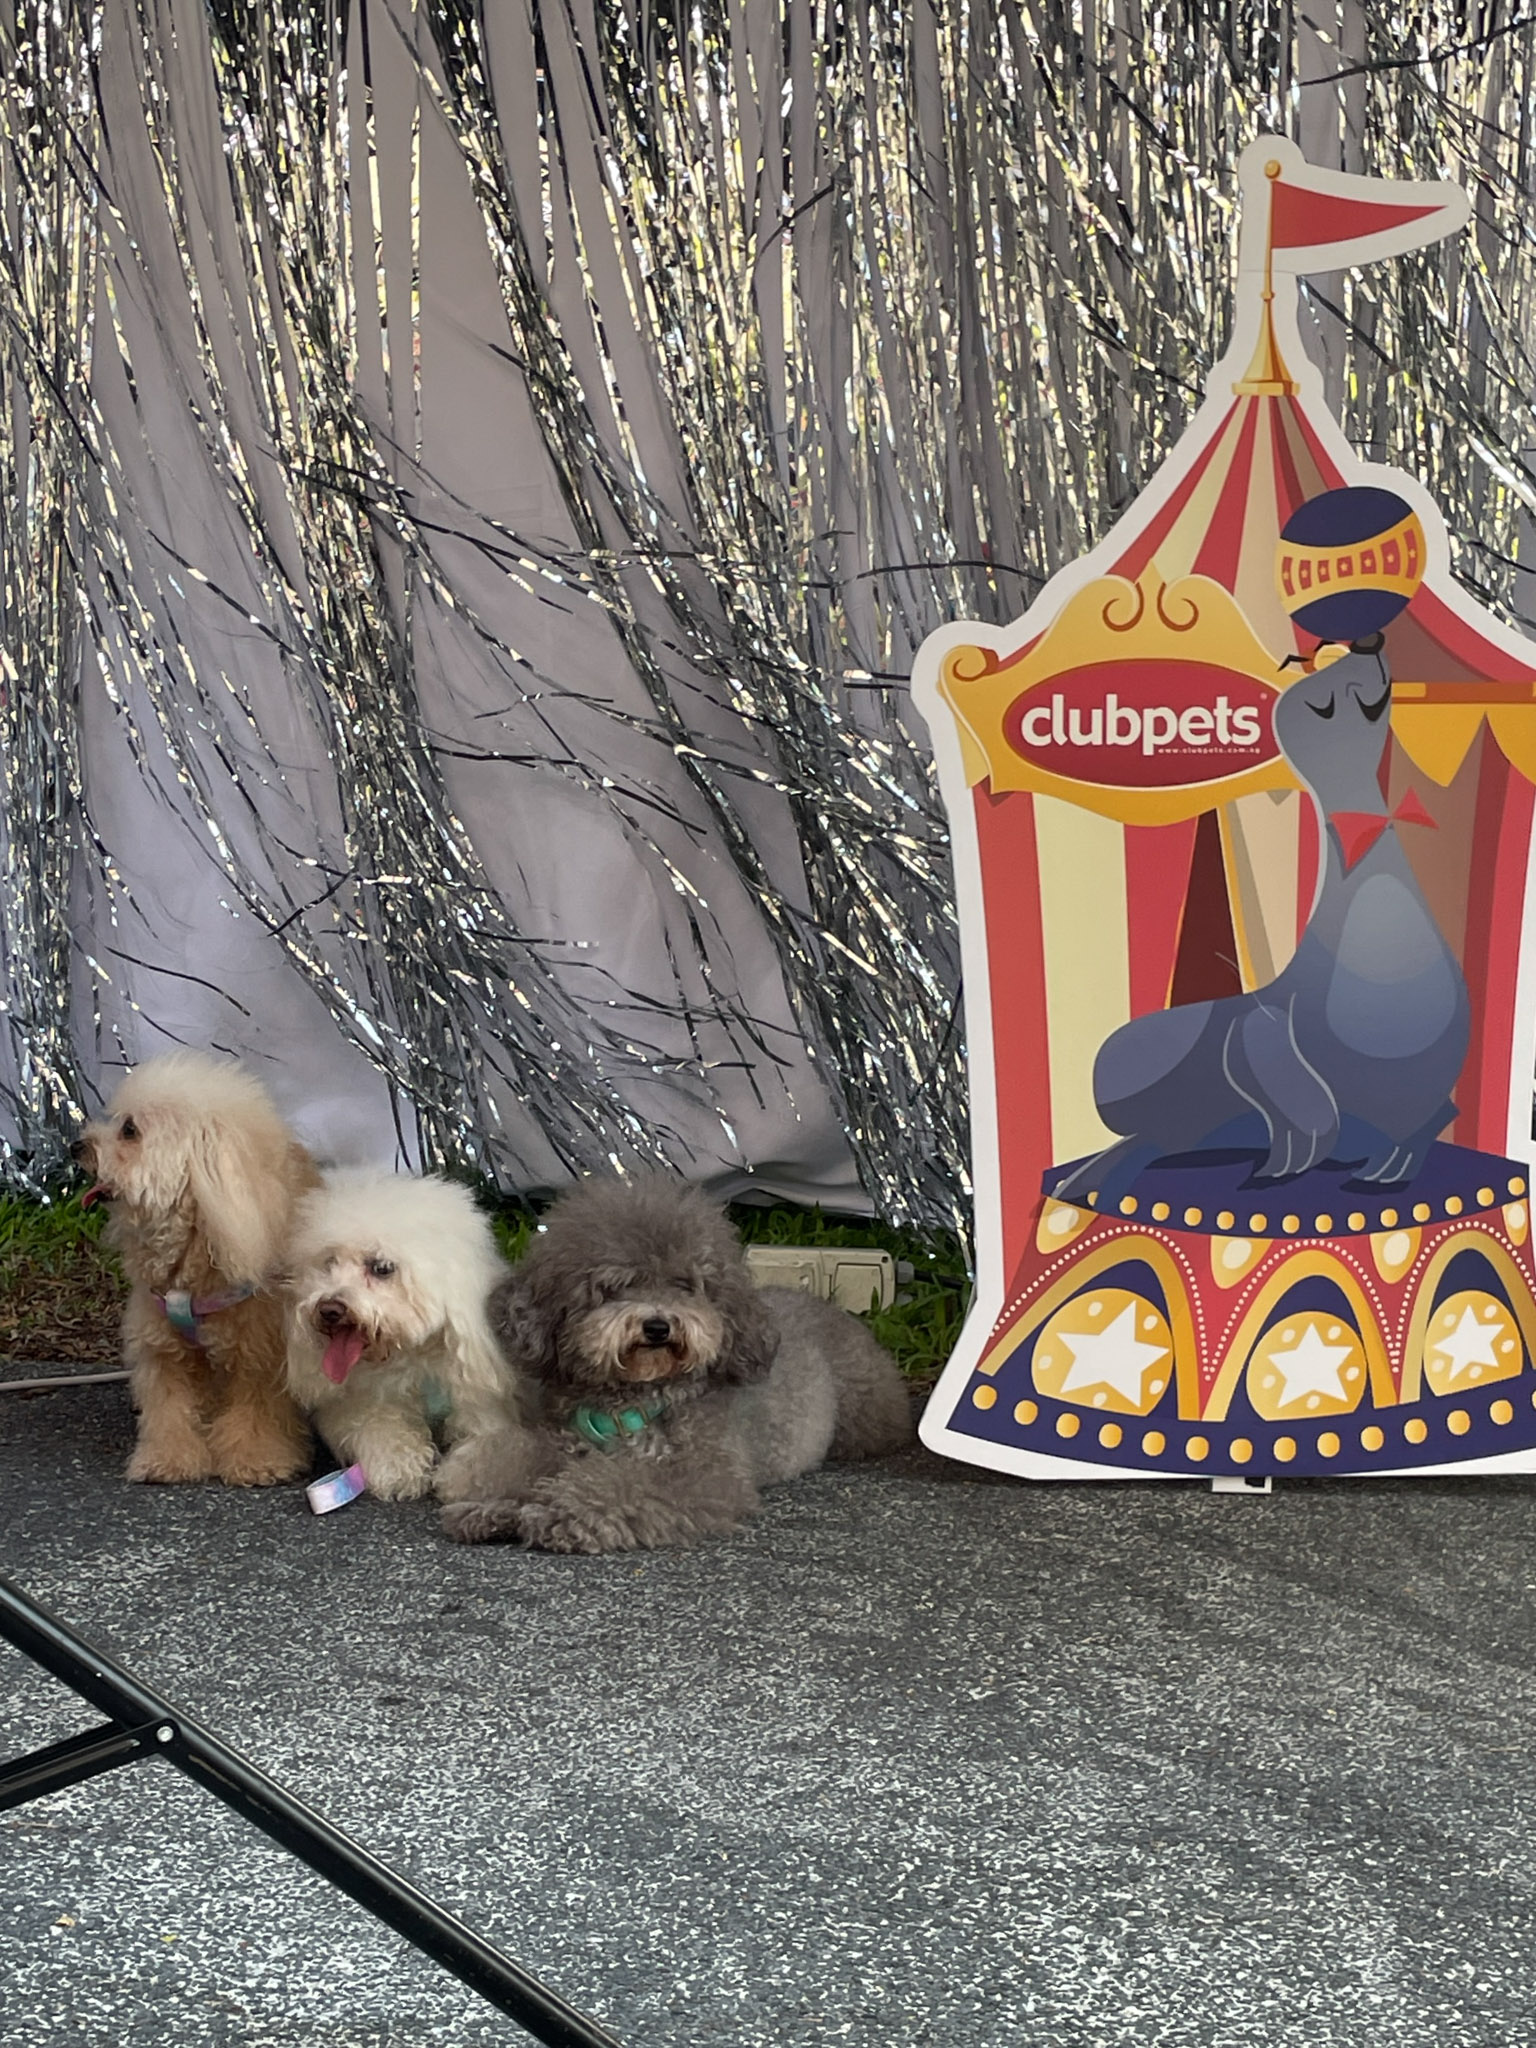 Three Bichon Frisés prepping for the perfect shot at the photobooth. Photo Credit: Dann Tan